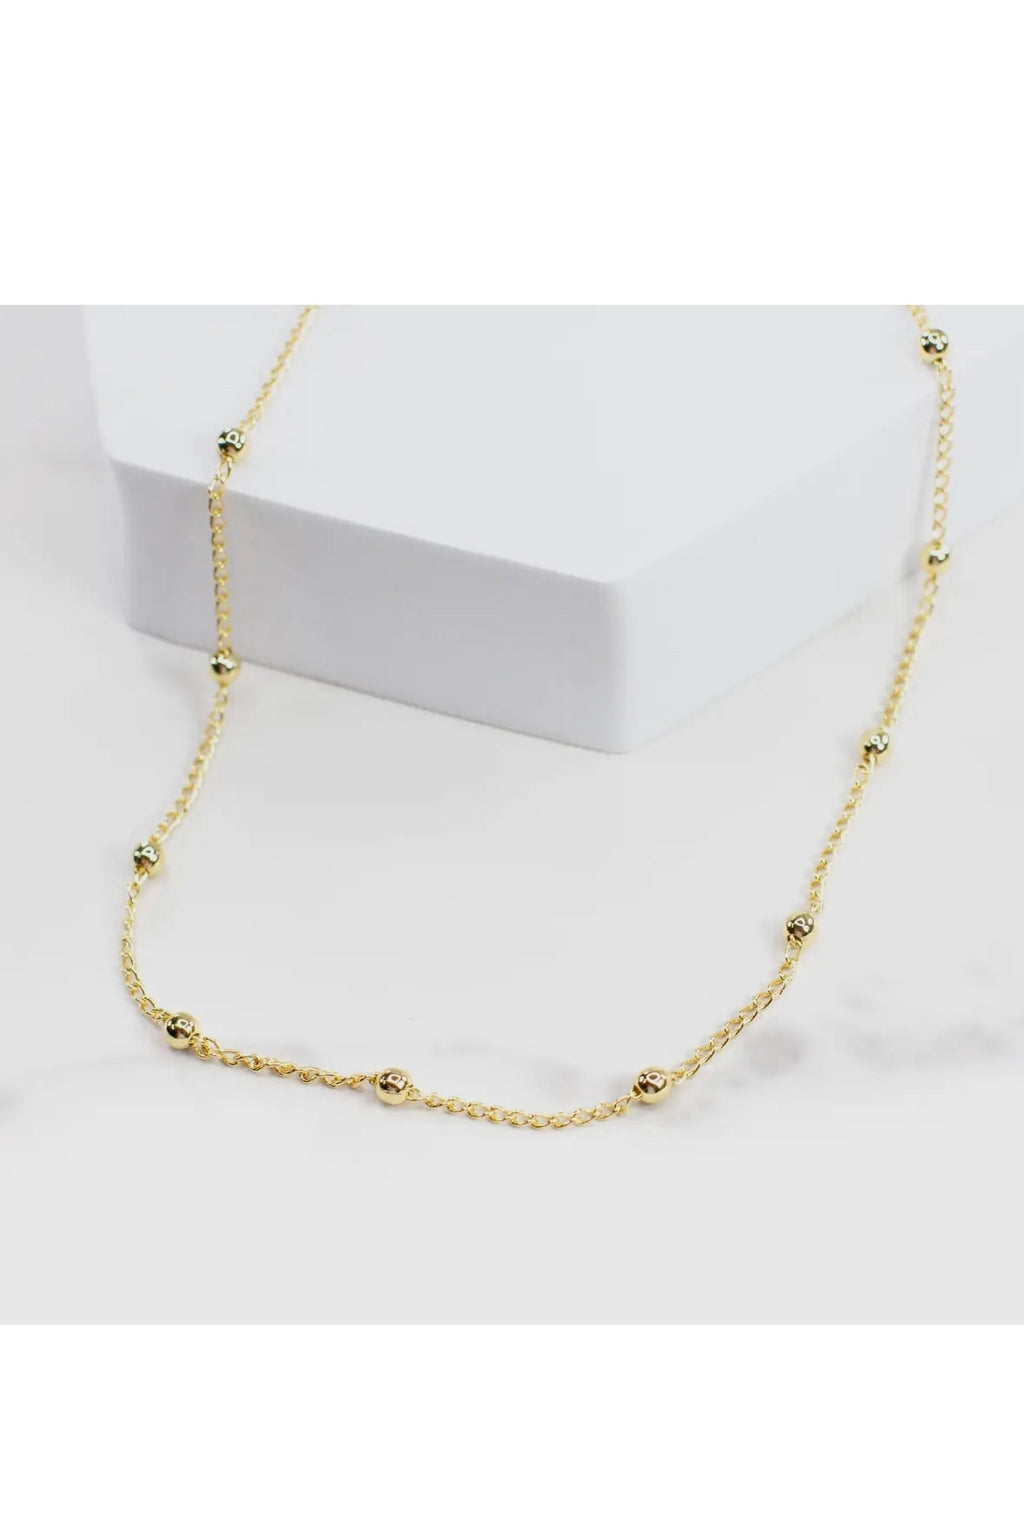 18k Gold Necklace with Gold Beads